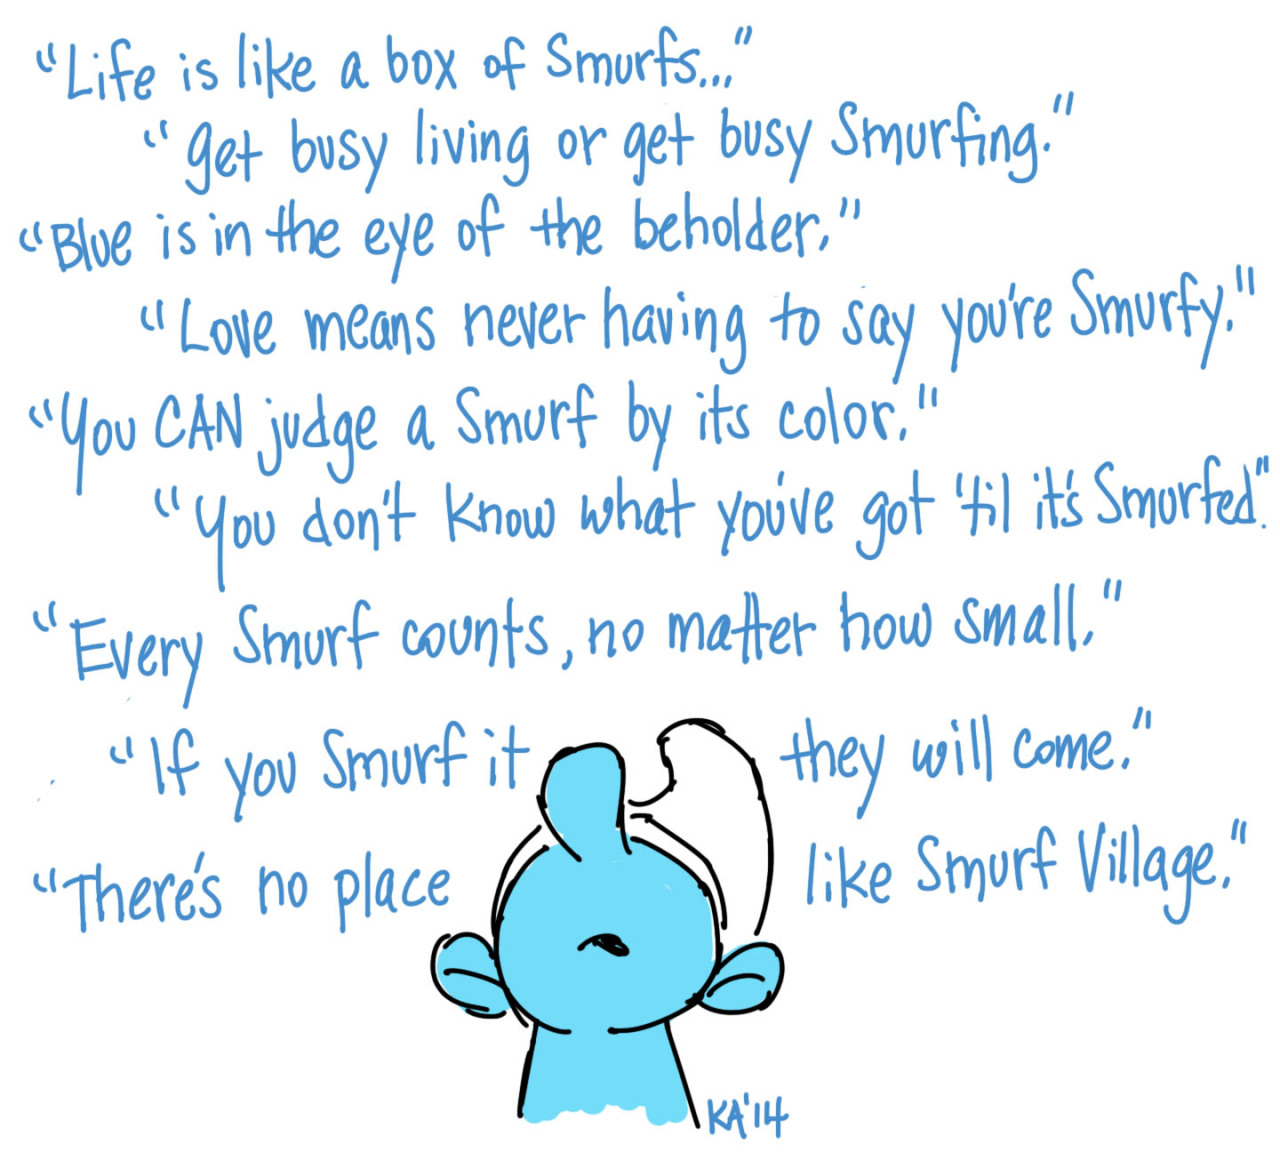 Smurfs Production Blog — Smurfing the Movie's “THEME” In my experience